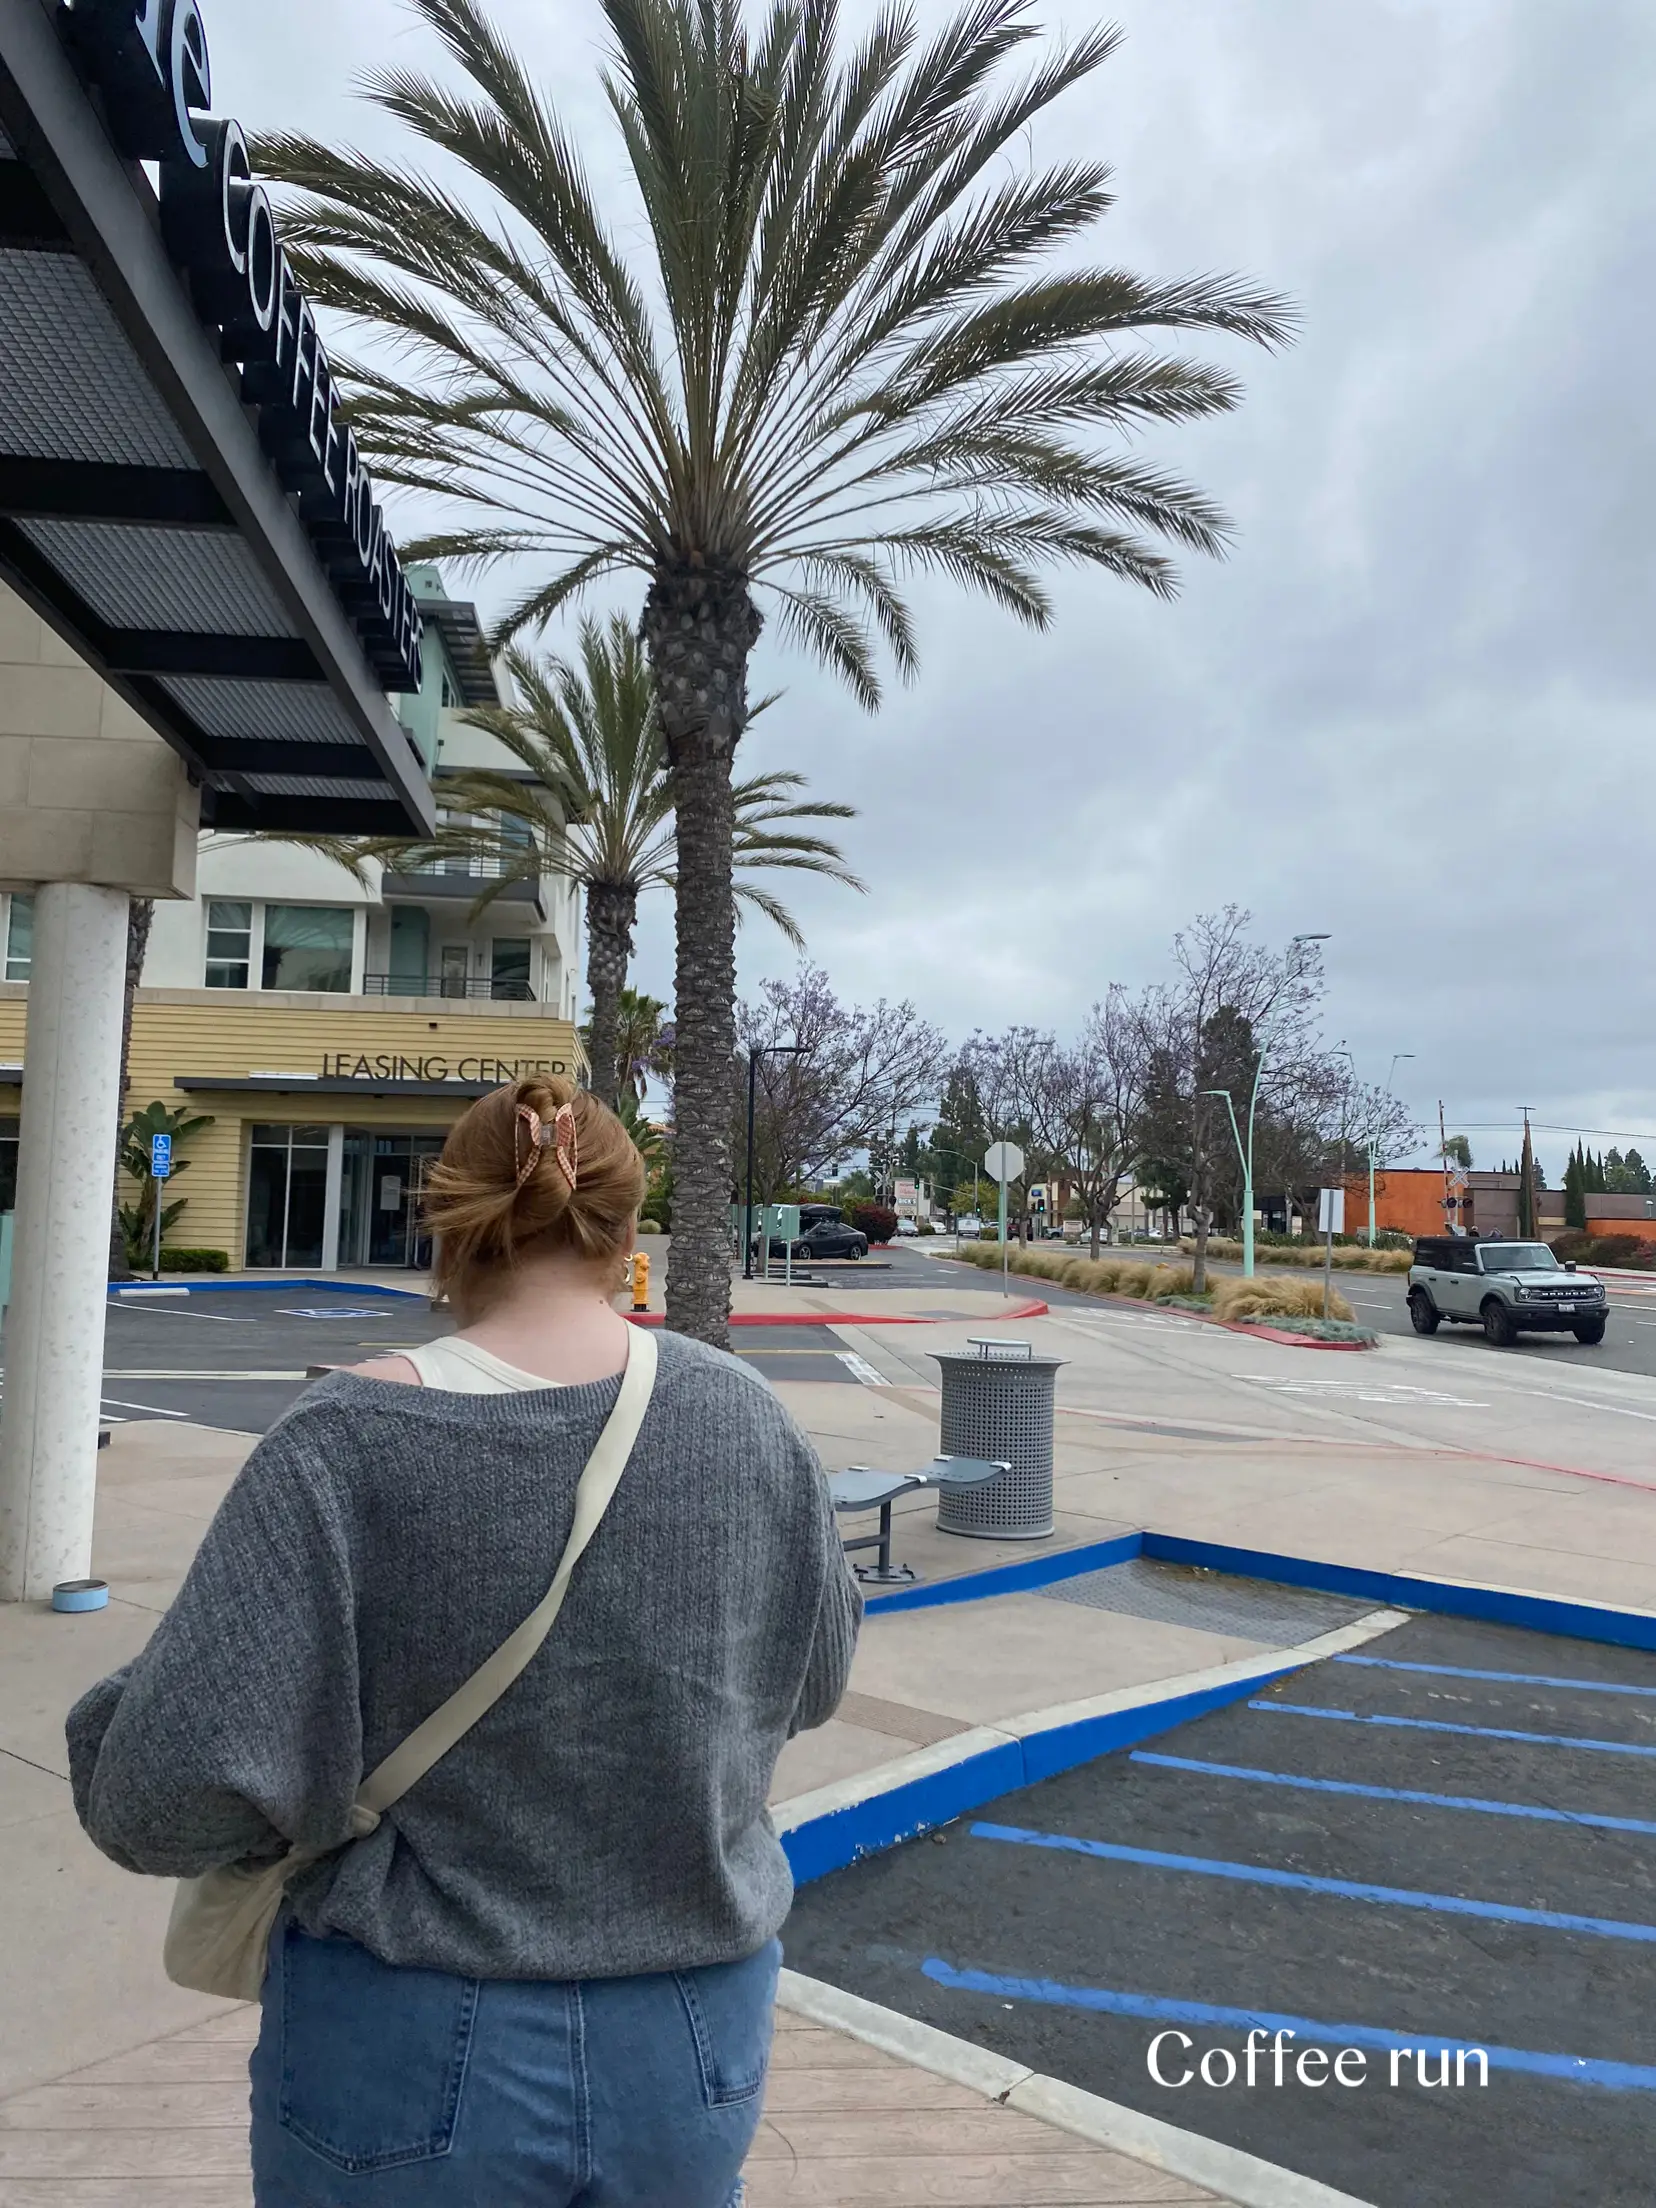  A woman is standing in a parking lot next to a building. She is wearing a brown sweater and jeans. The parking lot is empty and has a few cars parked in it. The woman is holding a coffee cup and a